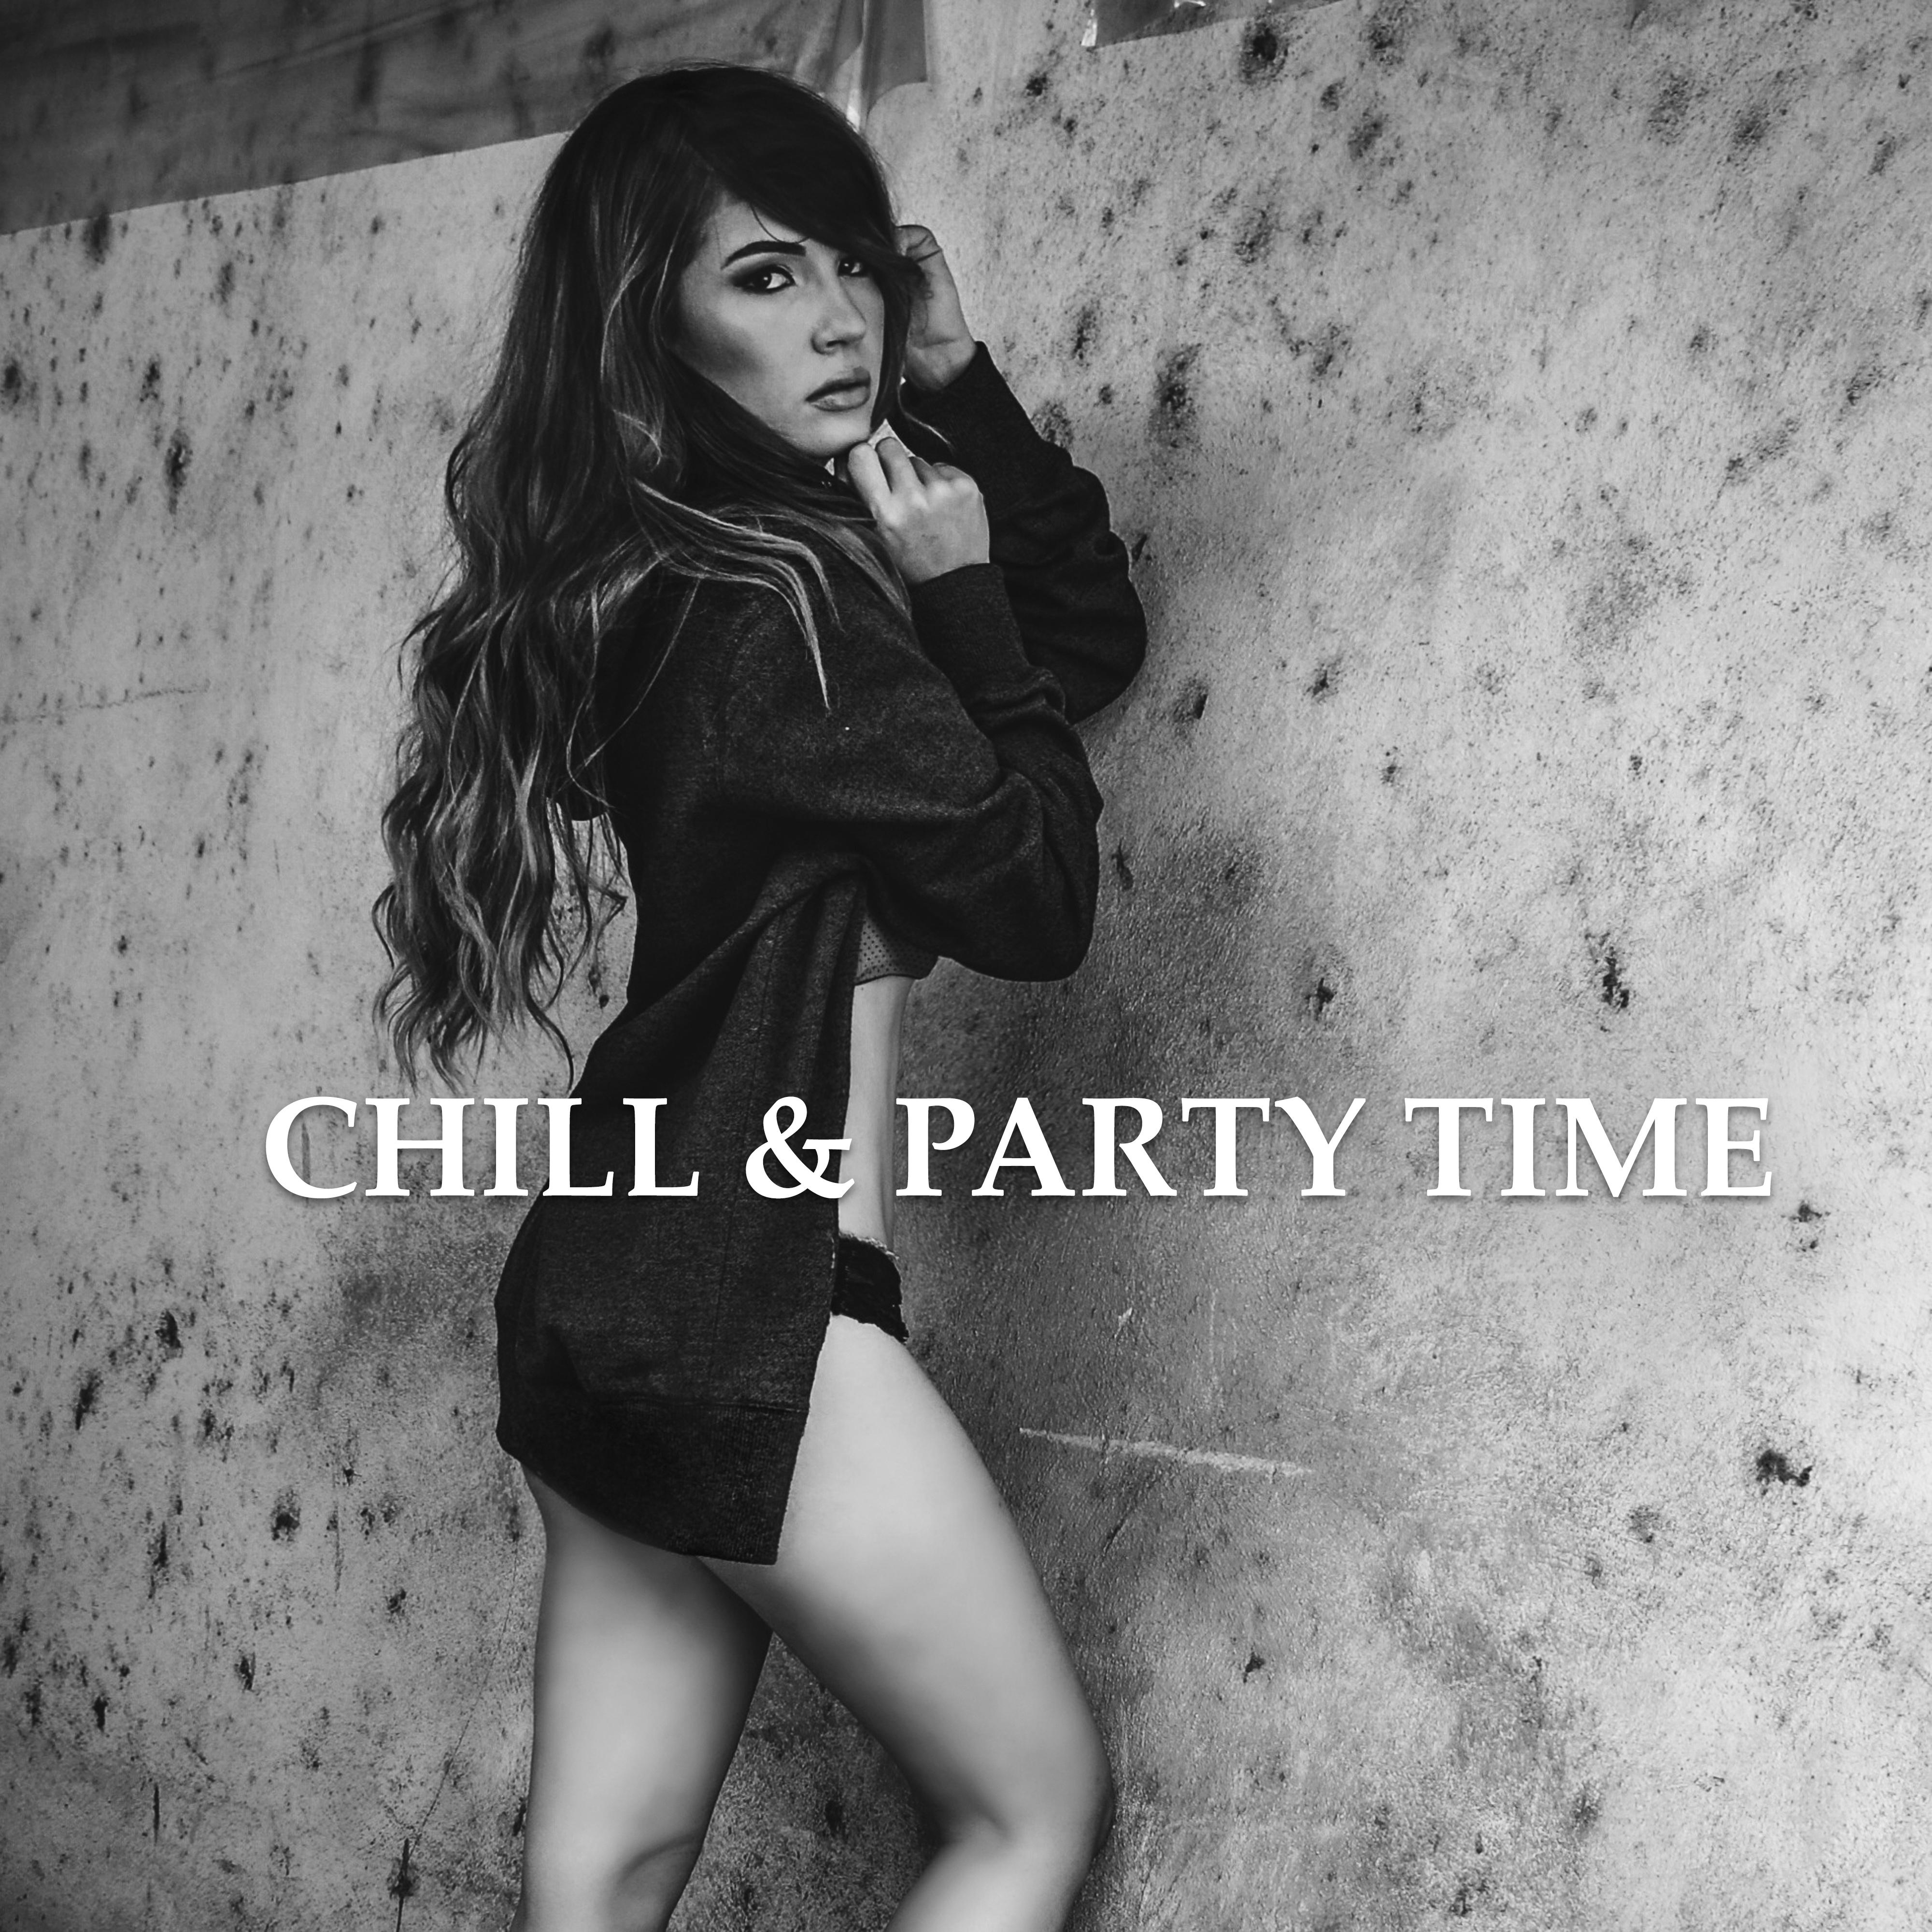 Chill  Party Time  Summertime, Drink Bar, Beach Party, Total Relaxation, Dance Floor,  Vibes, Ibiza Lounge, Best Chill Out Music at Night